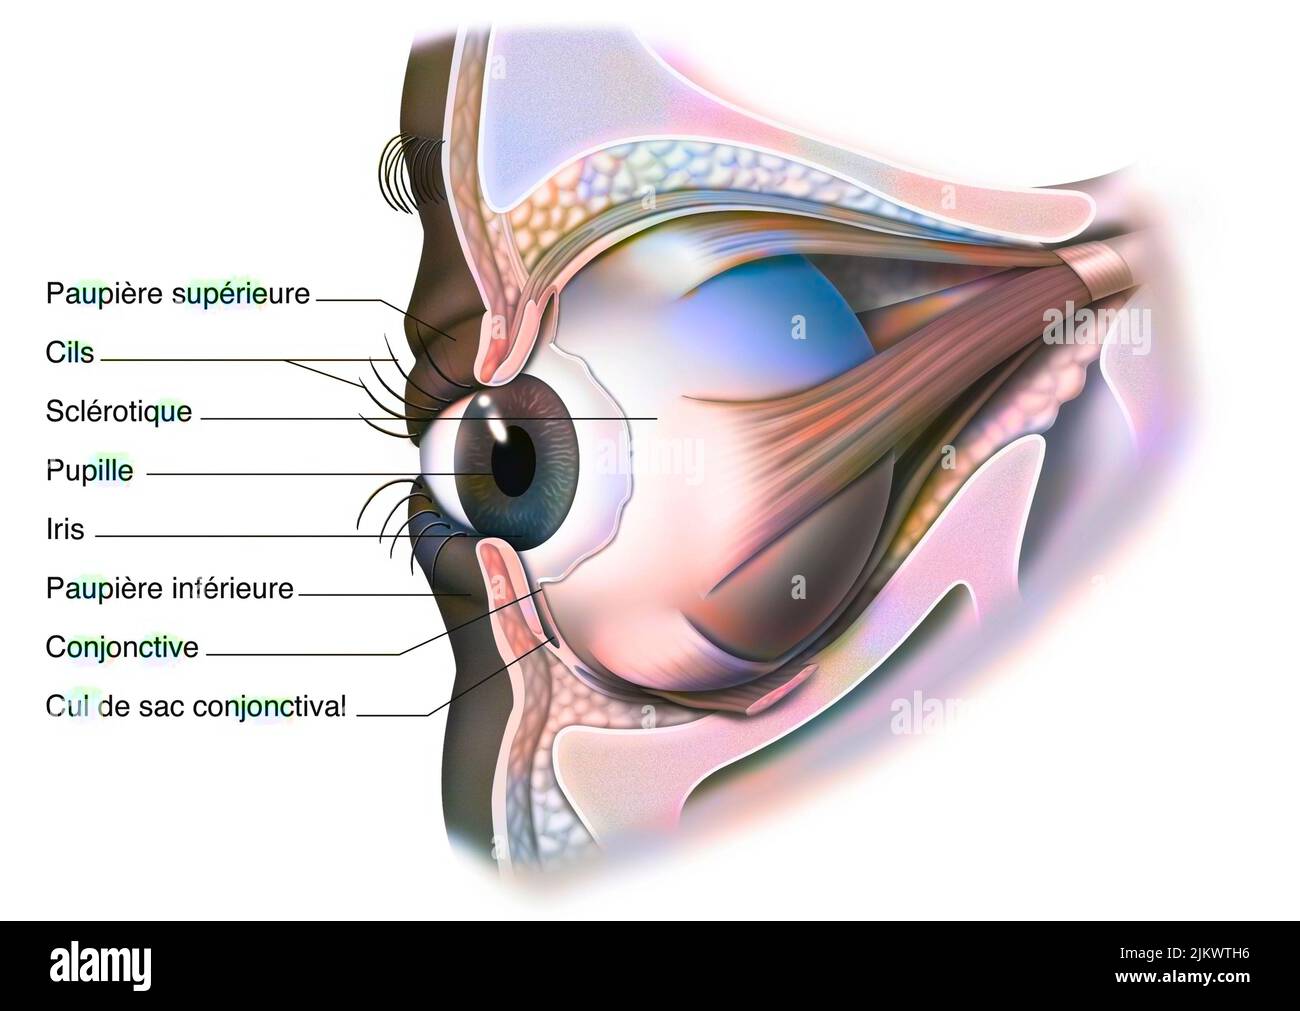 Anatomy of the eye and eyelid (viewed from 3/4) with iris, pupil. Stock Photo